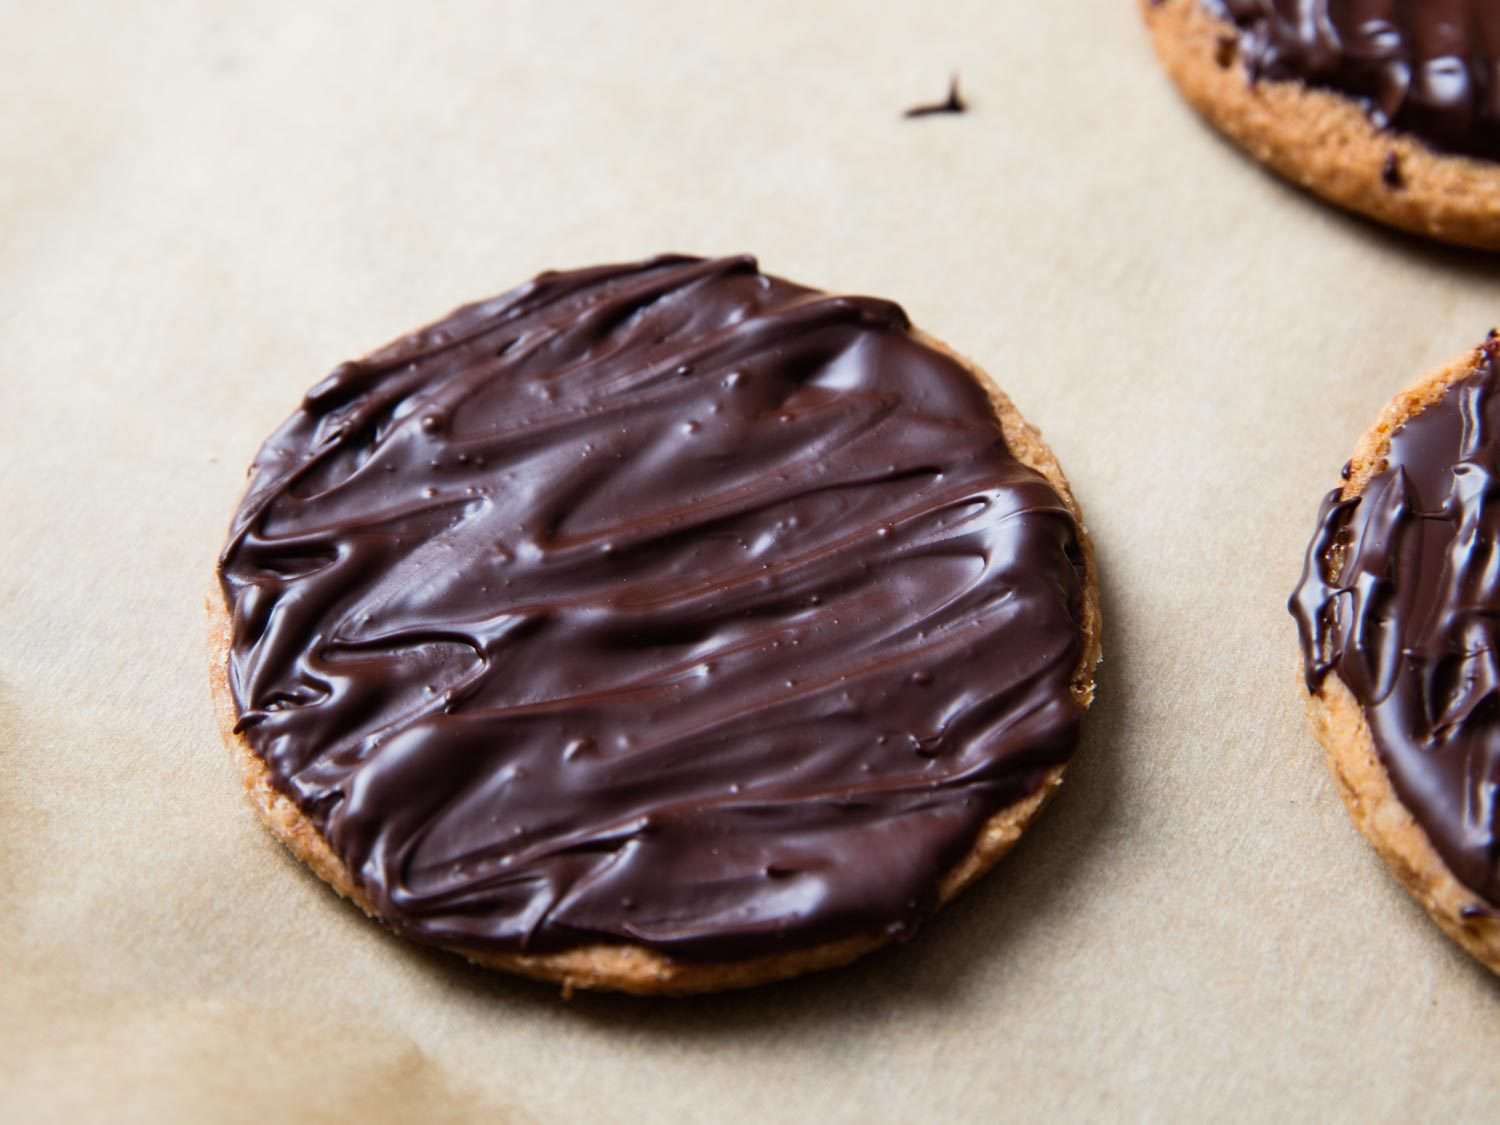 A vegan chocolate-covered digestive biscuit